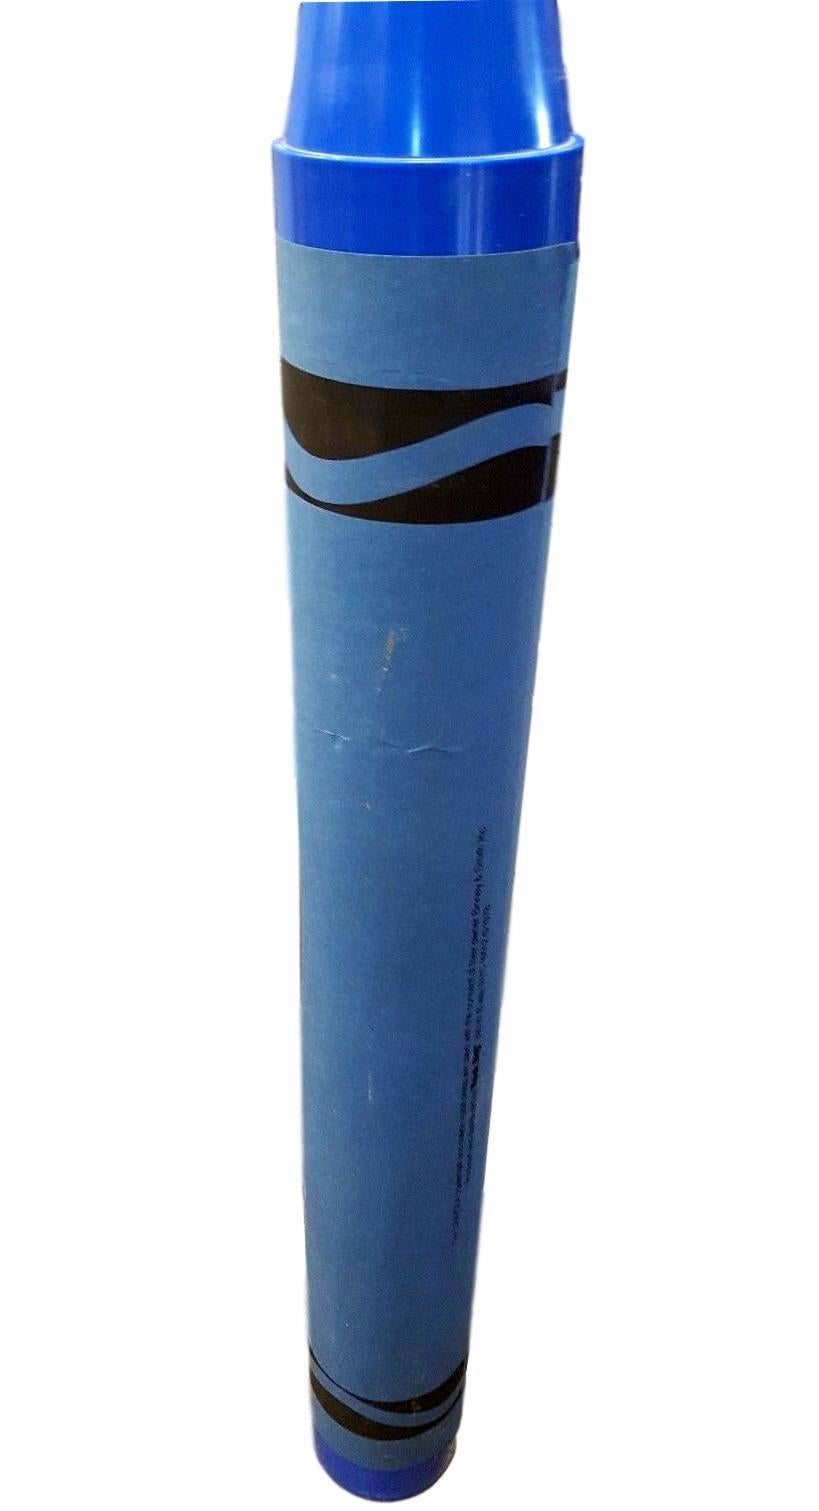 Fantastic blue Crayola crayon. Heavy plastic frame with thick paper label. Made by Think Big. This is a rare vintage piece. Excellent vintage condition. Great pop art!

 